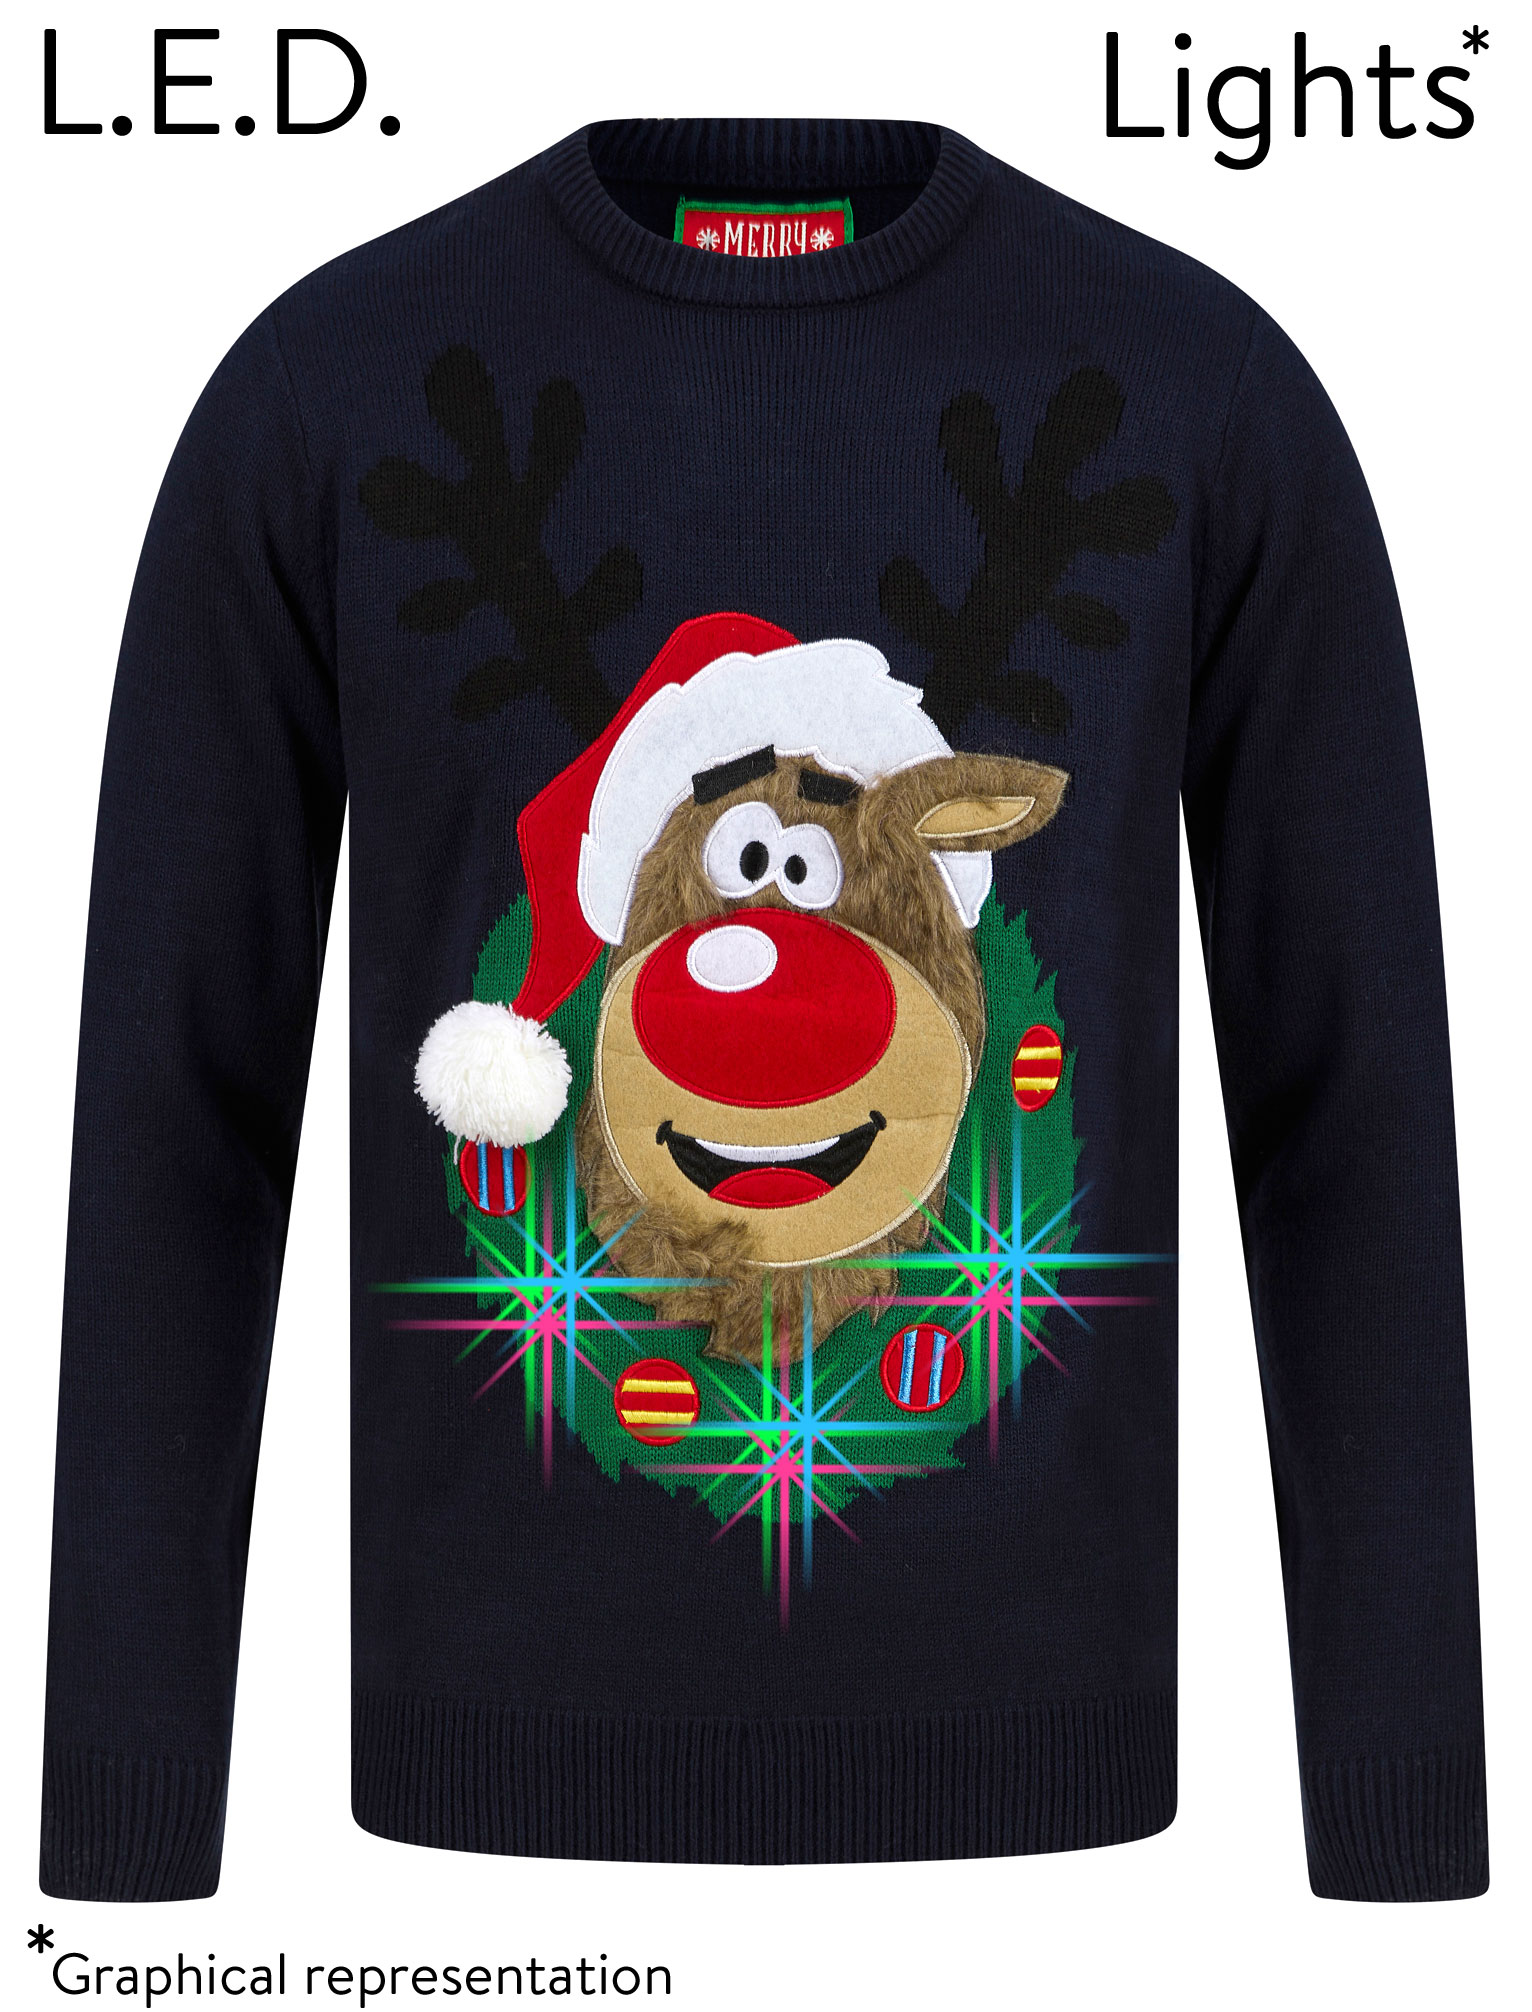 New Men's ABC LIGHT MERRY CHRISTMAS THE UPSIDE DOWN  XMAS Knitted Jumper Sweater 